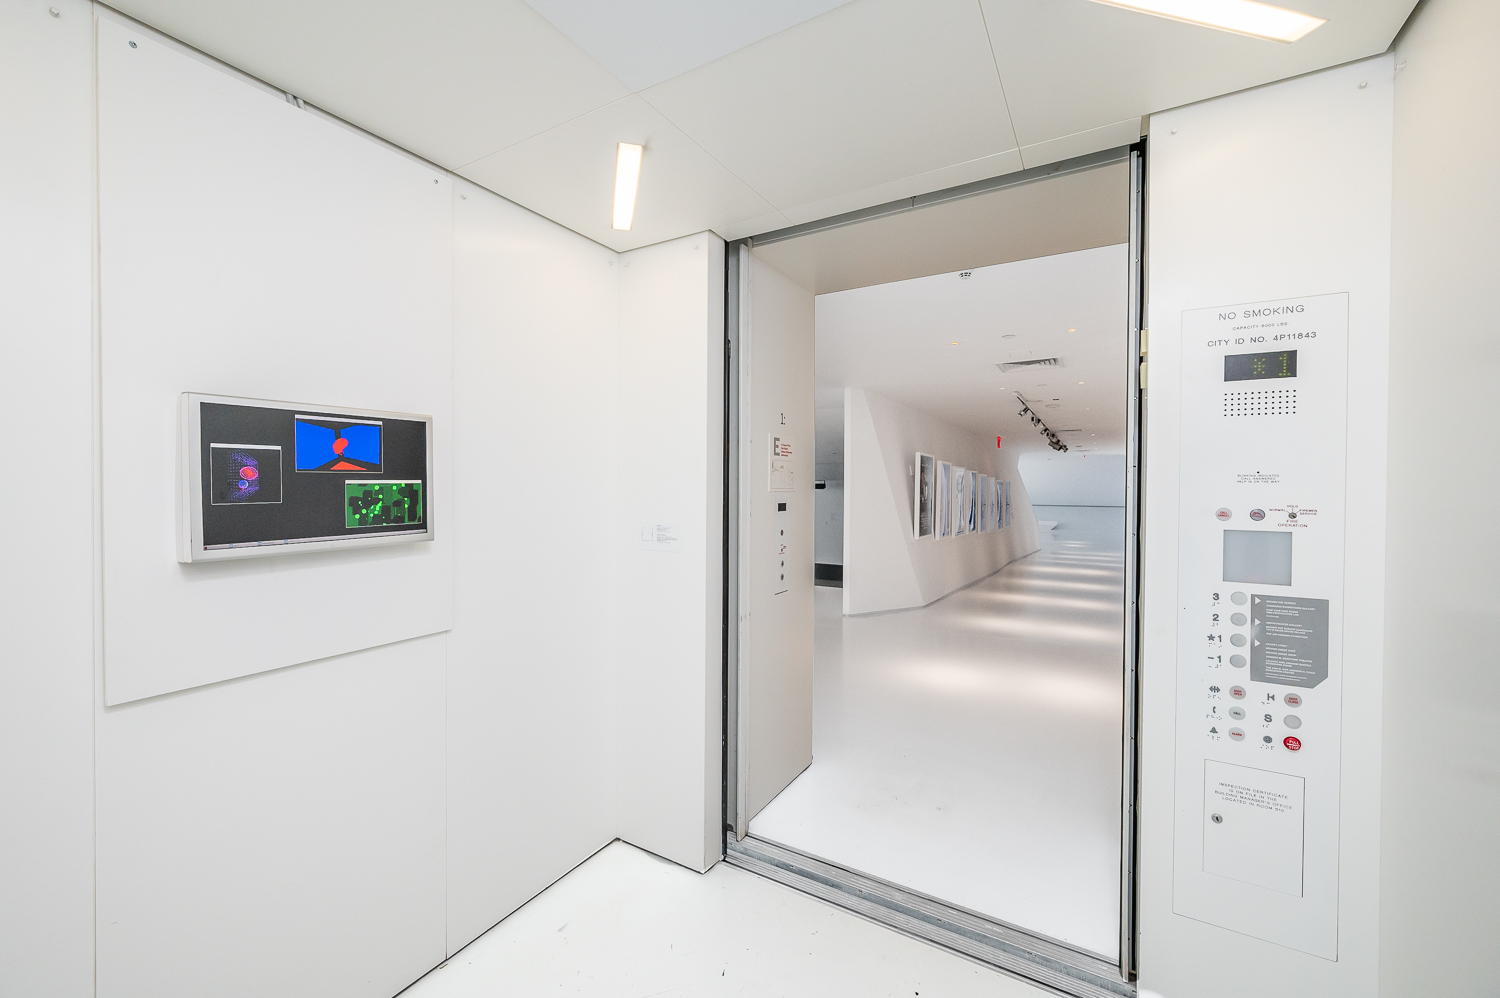 A photo of a white-painted elevator with a work on a monitor on view on one wall and a view into the corridor beyond